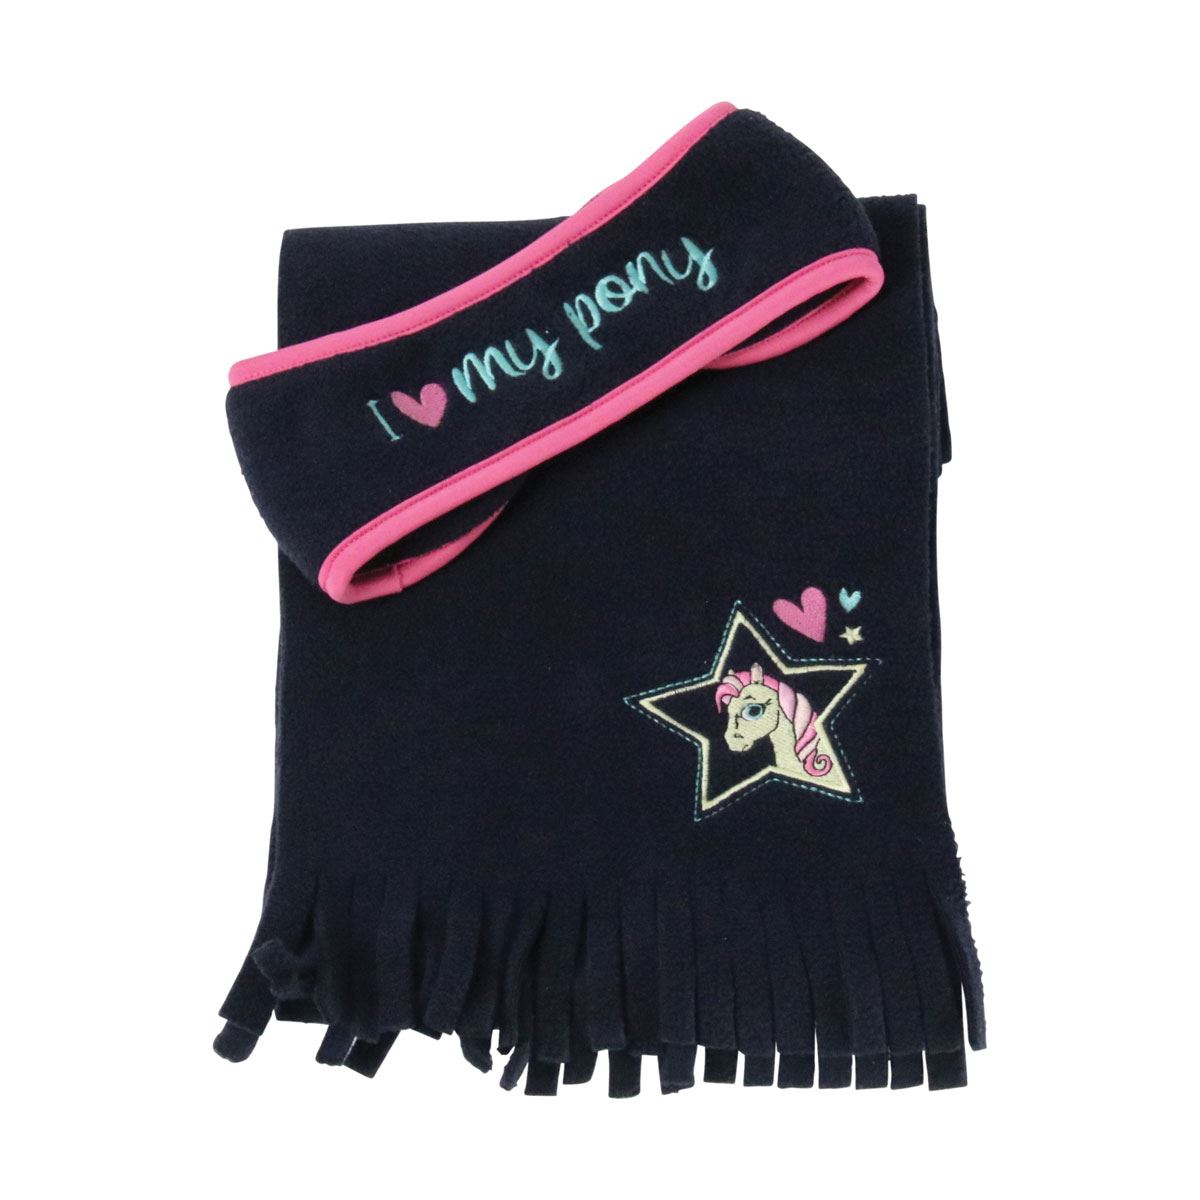 I Love My Pony Collection Head Band & Scarf Set by Little Rider - Just Horse Riders